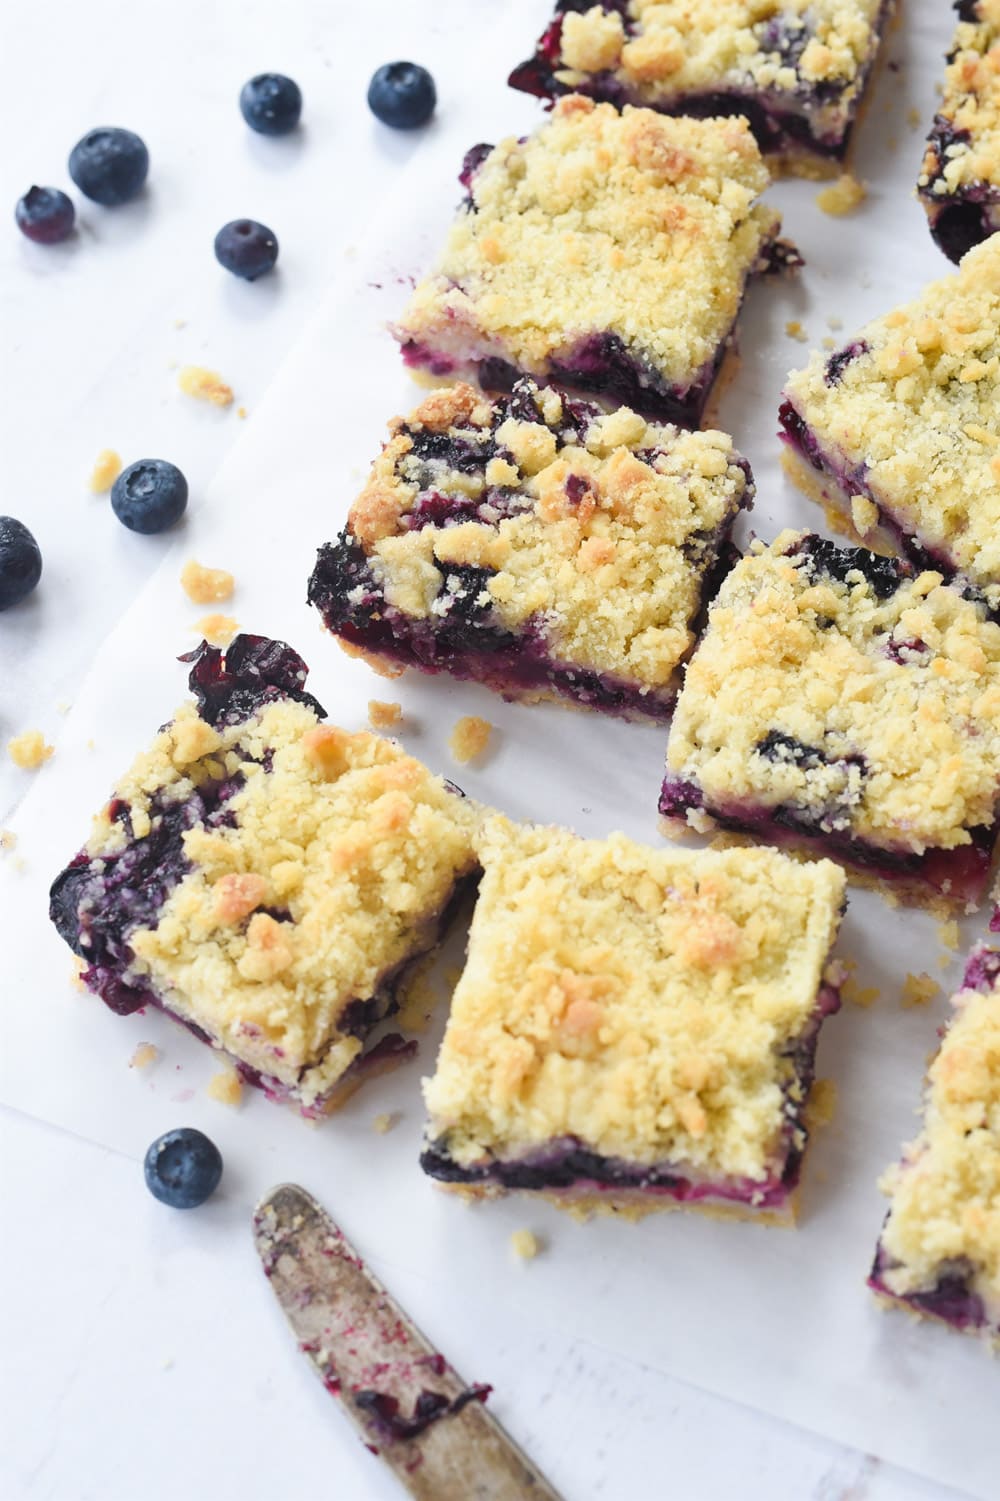 Blueberry Crumble Bars and a knife